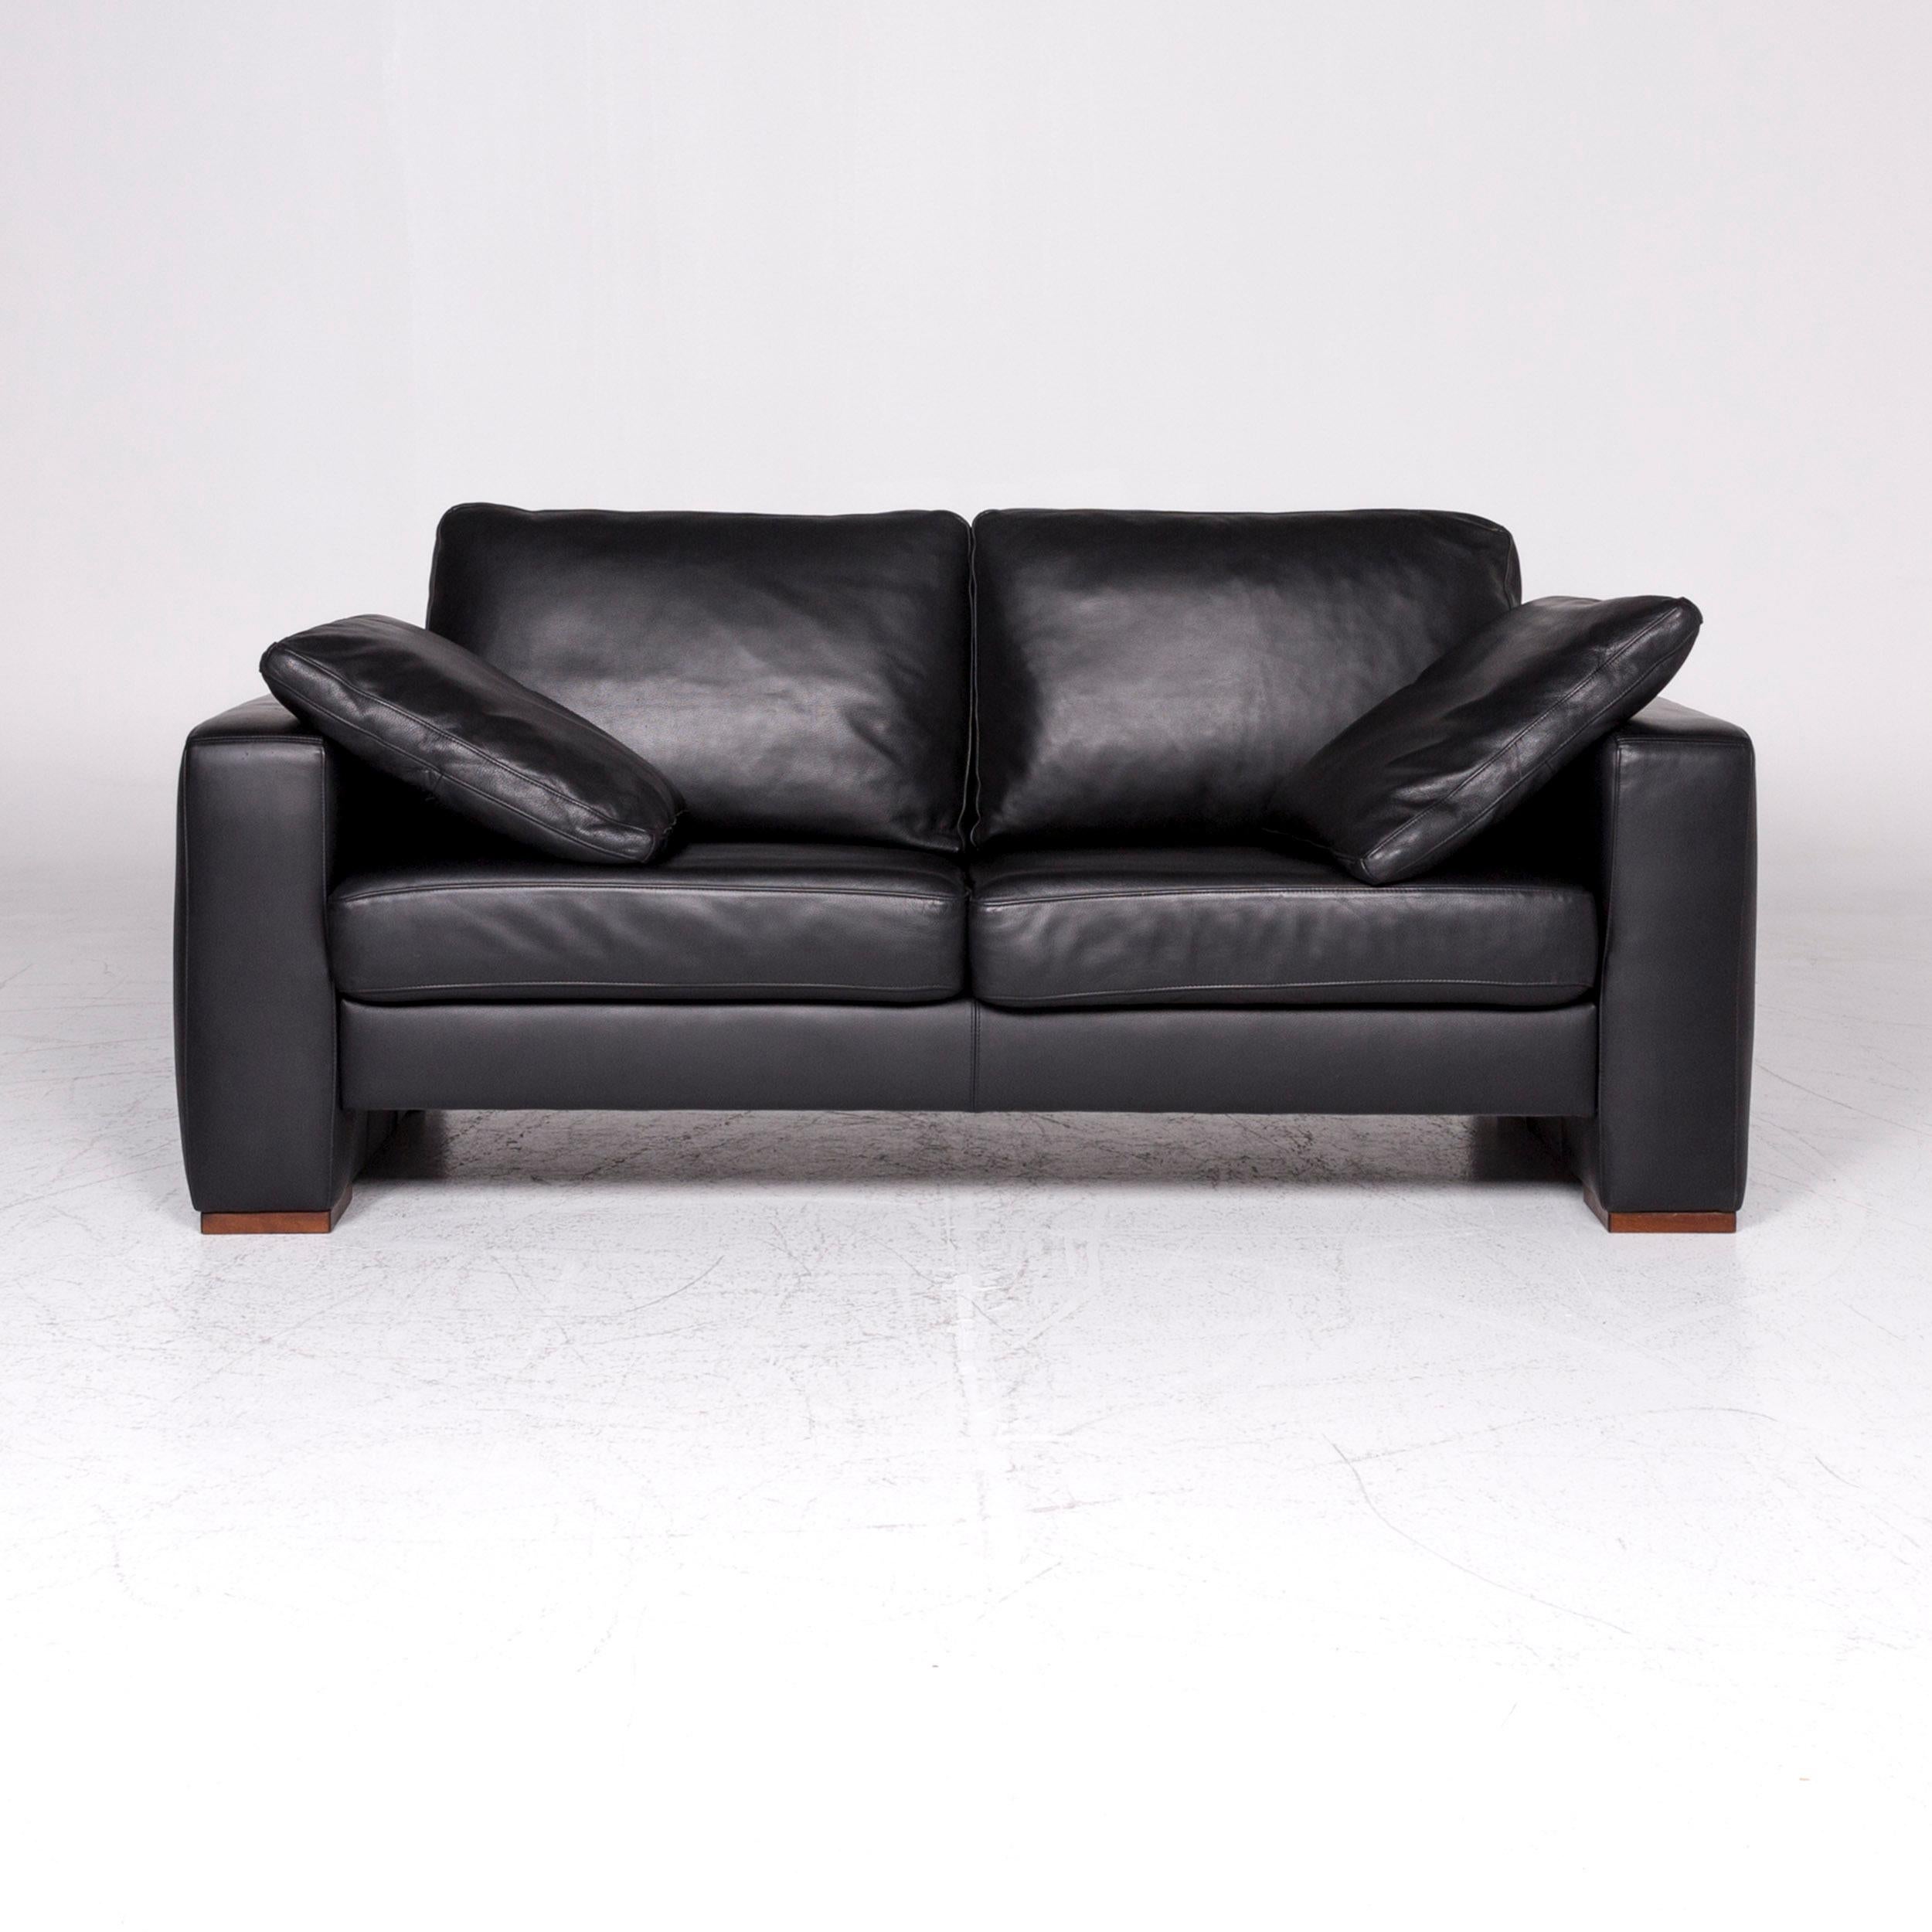 We bring to you a Machalke designer leather sofa black two-seat couch.

 Product measurements in centimeters:
 
Depth: 89
Width: 186
Height: 77
Seat-height: 43
Rest-height: 60
Seat-depth: 50
Seat-width: 145
Back-height: 36.

 